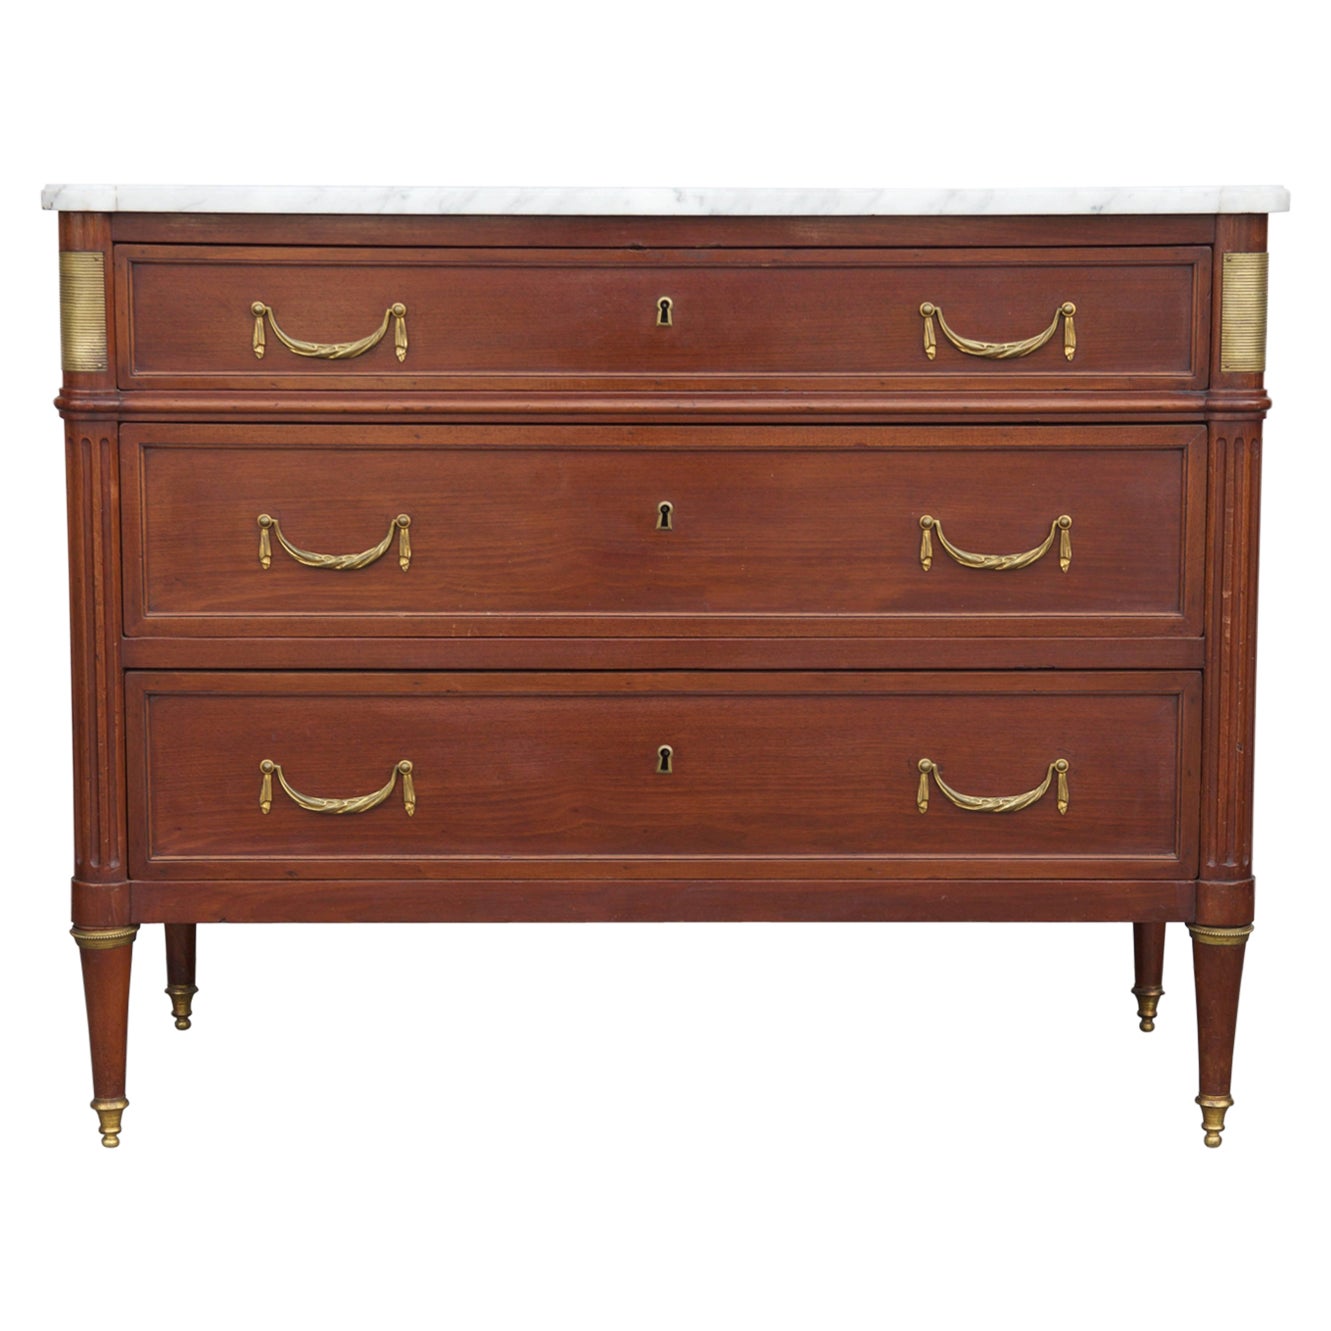 Chic Louis XVI-Style Neoclassical Commode For Sale